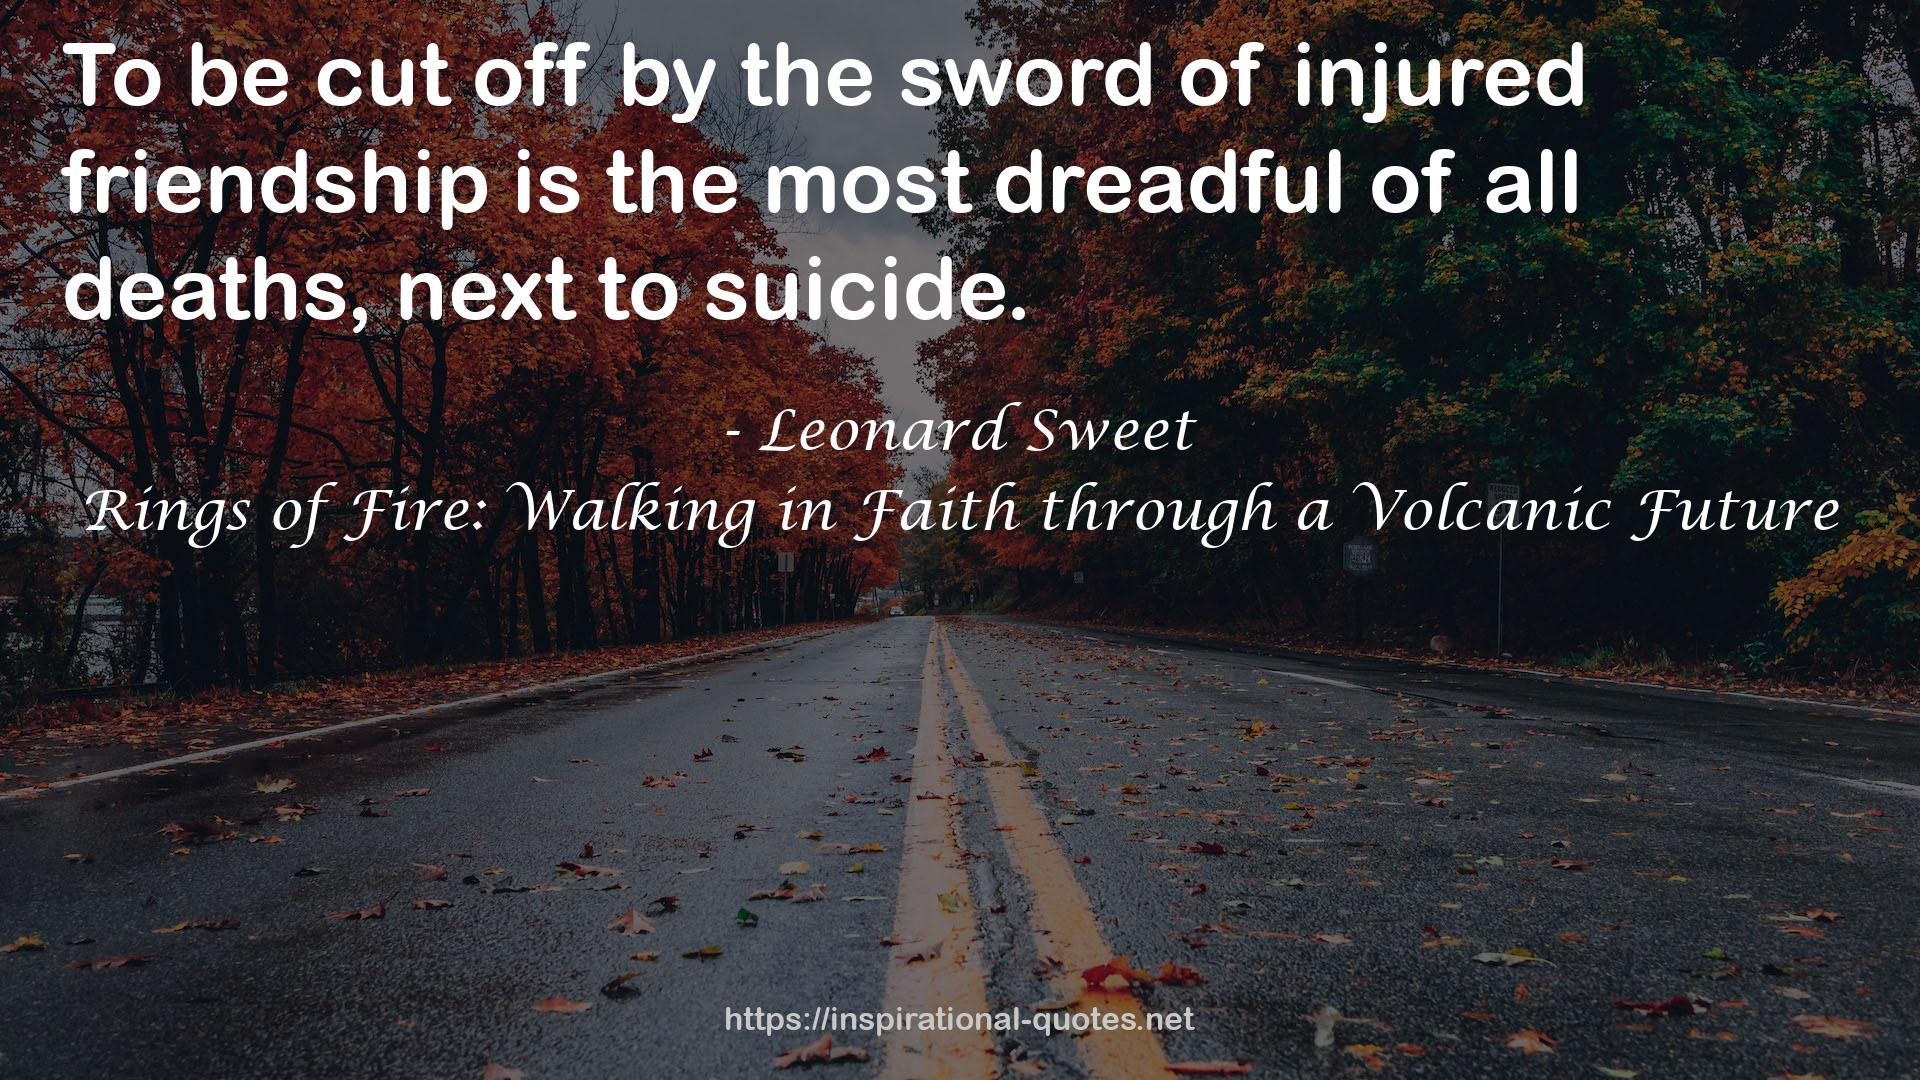 Rings of Fire: Walking in Faith through a Volcanic Future QUOTES